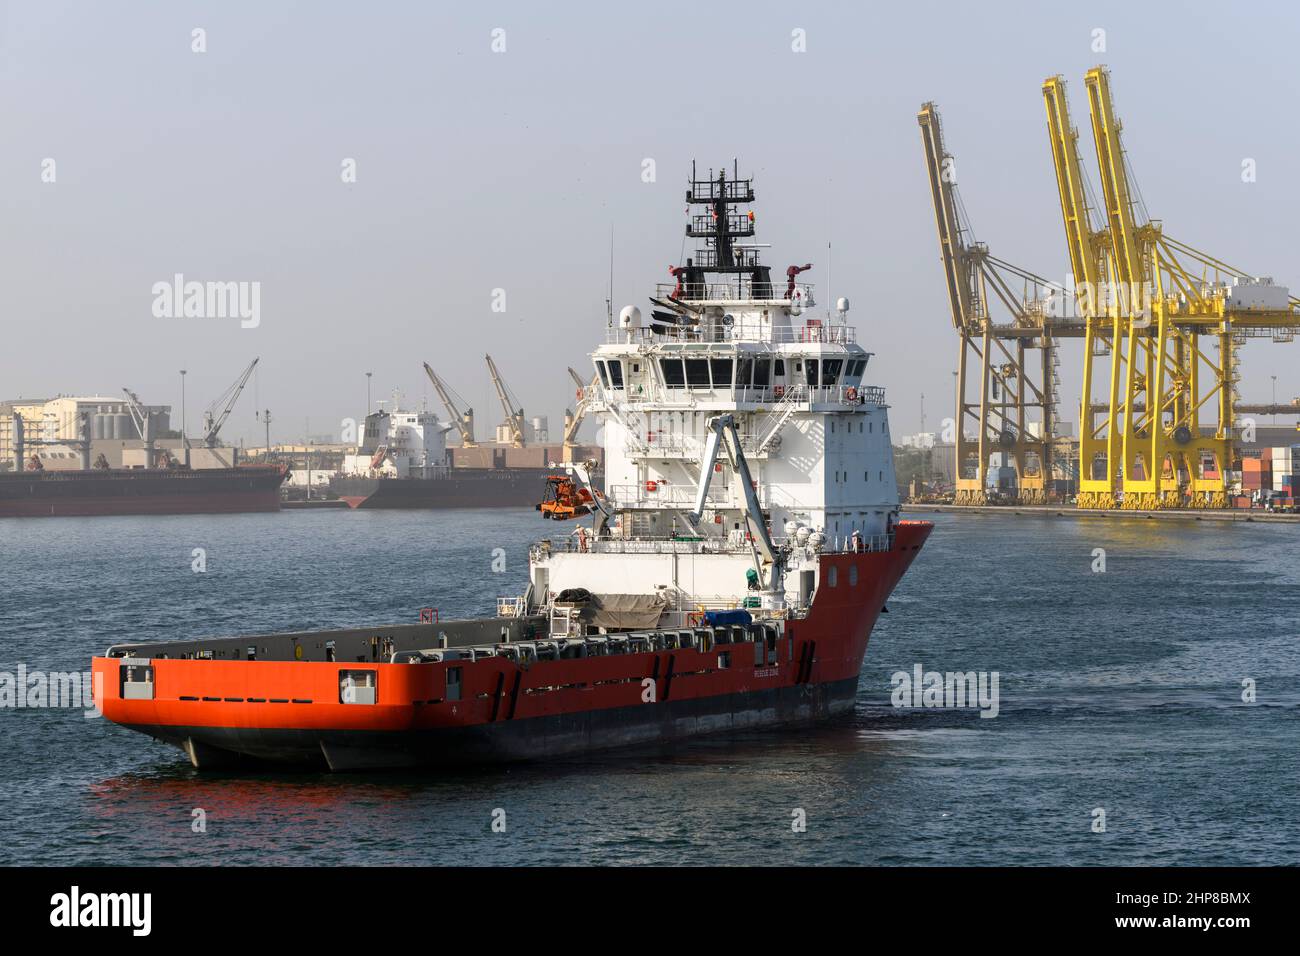 Big orange offshore supply vessel in the port. AHTS ship. Stock Photo